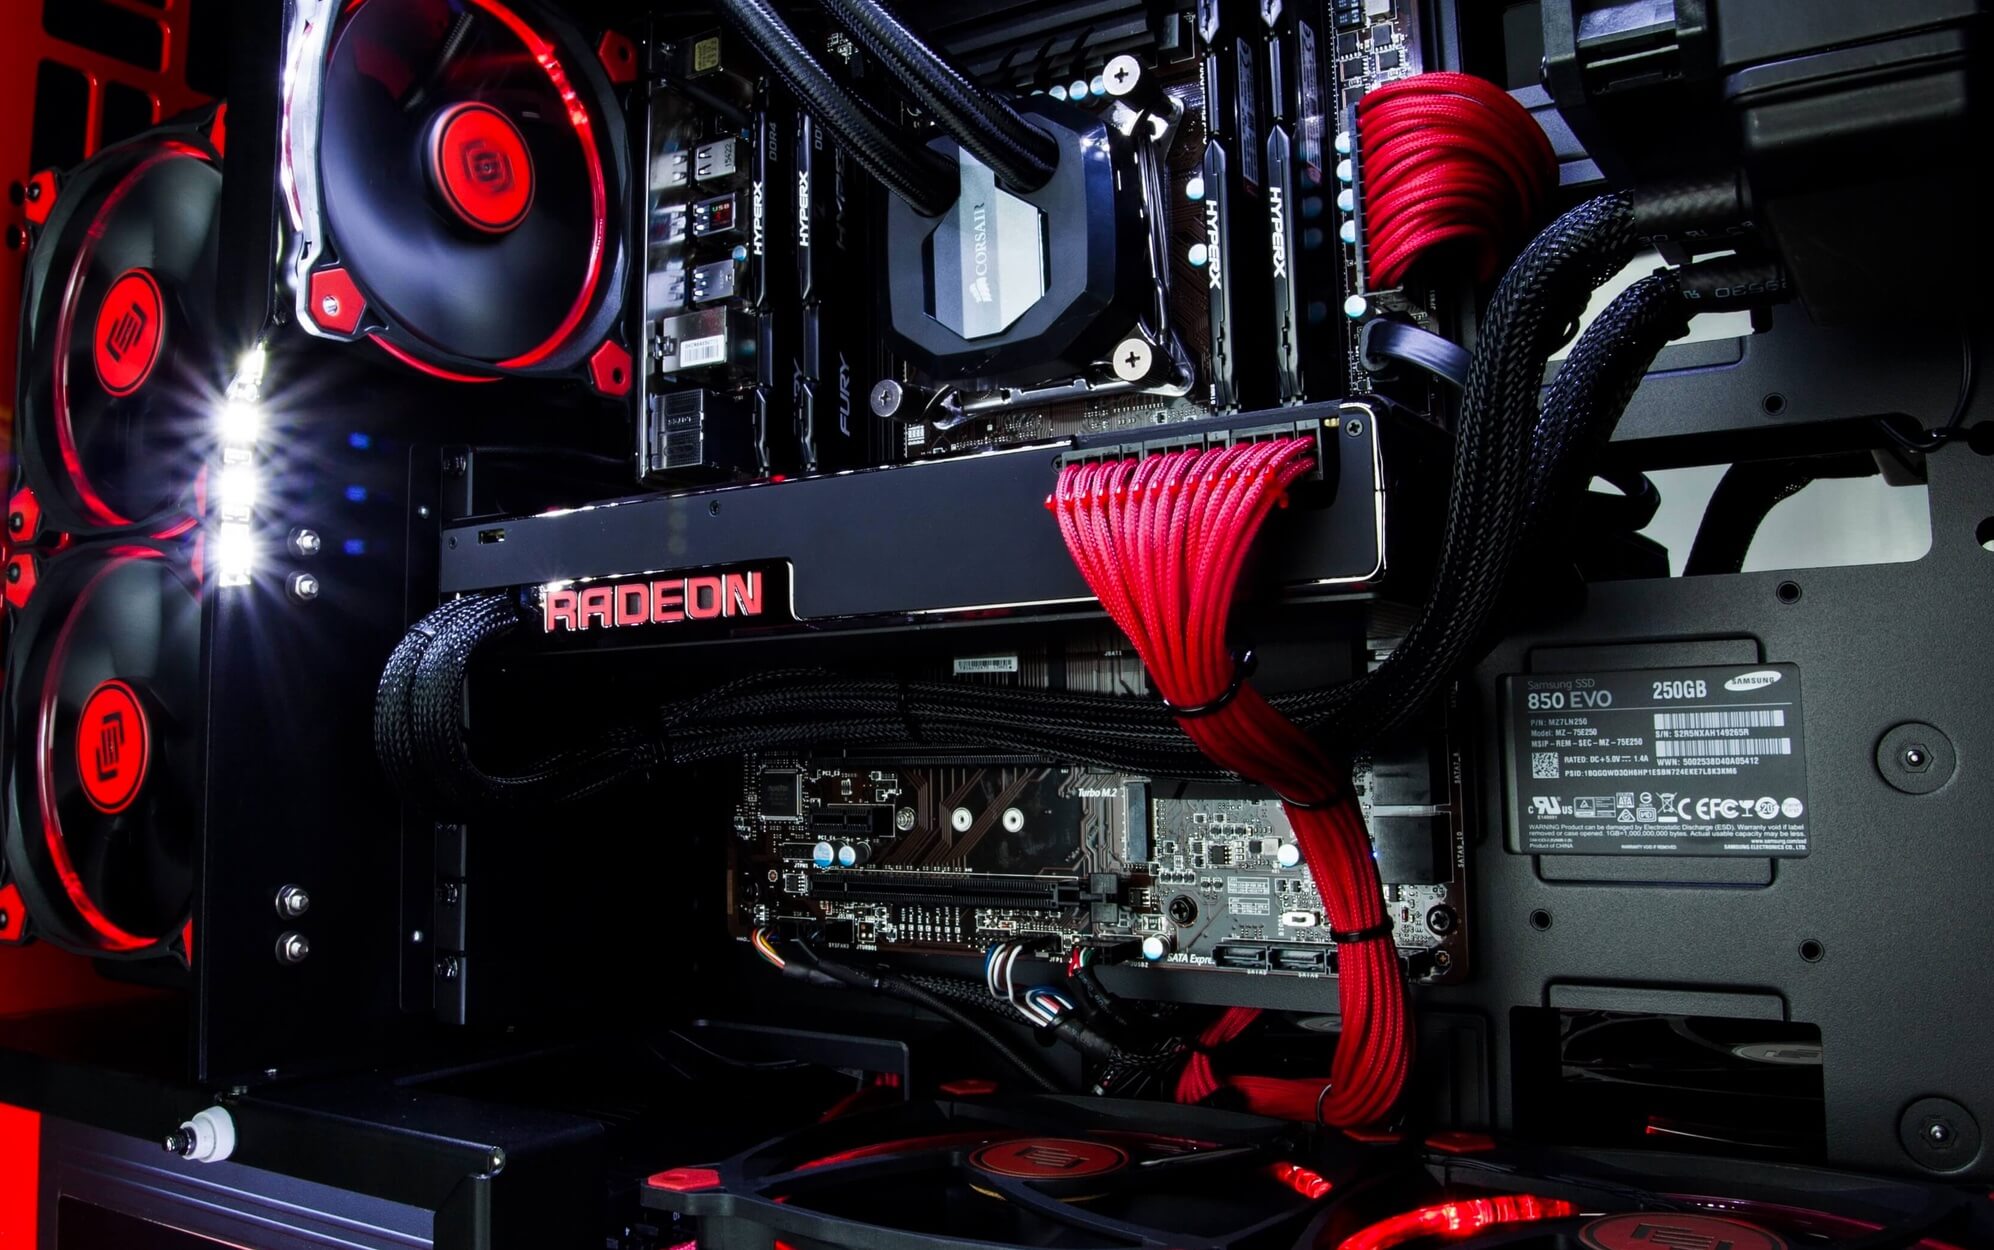 AMD launches new Radeon Software Adrenalin Edition: Here's what's new